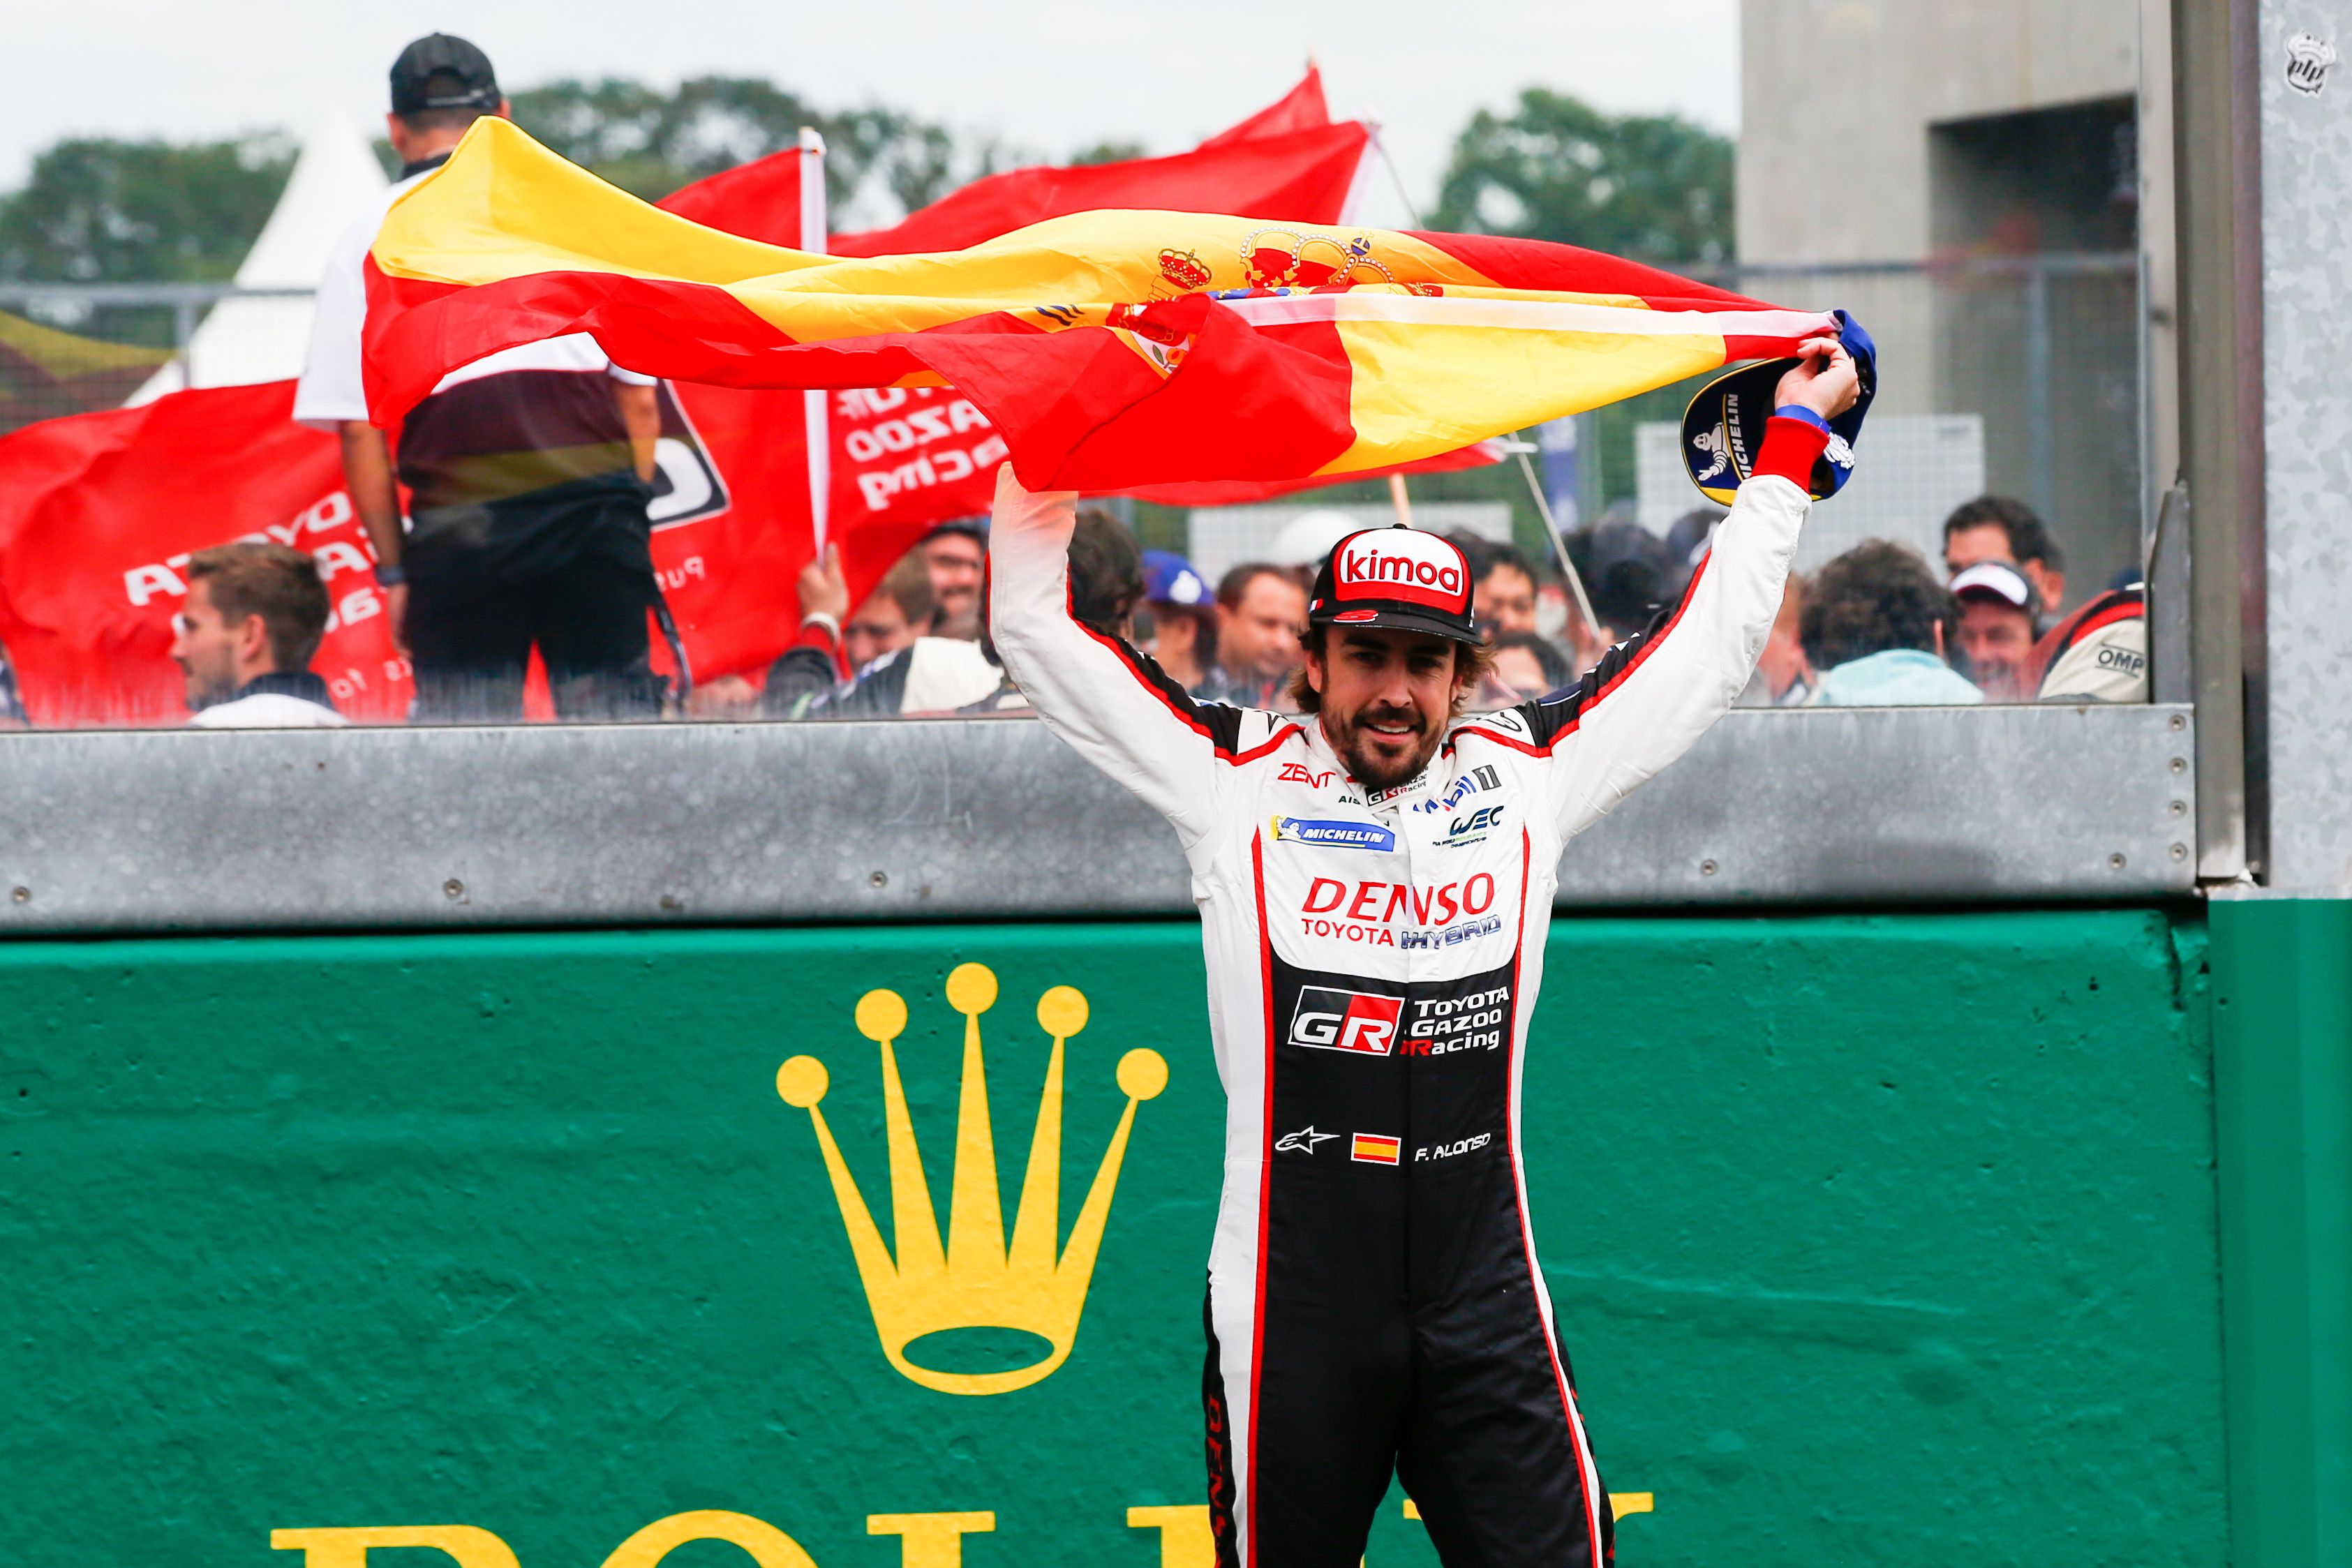 Fernando Alonso at the 2018 Le Mans race